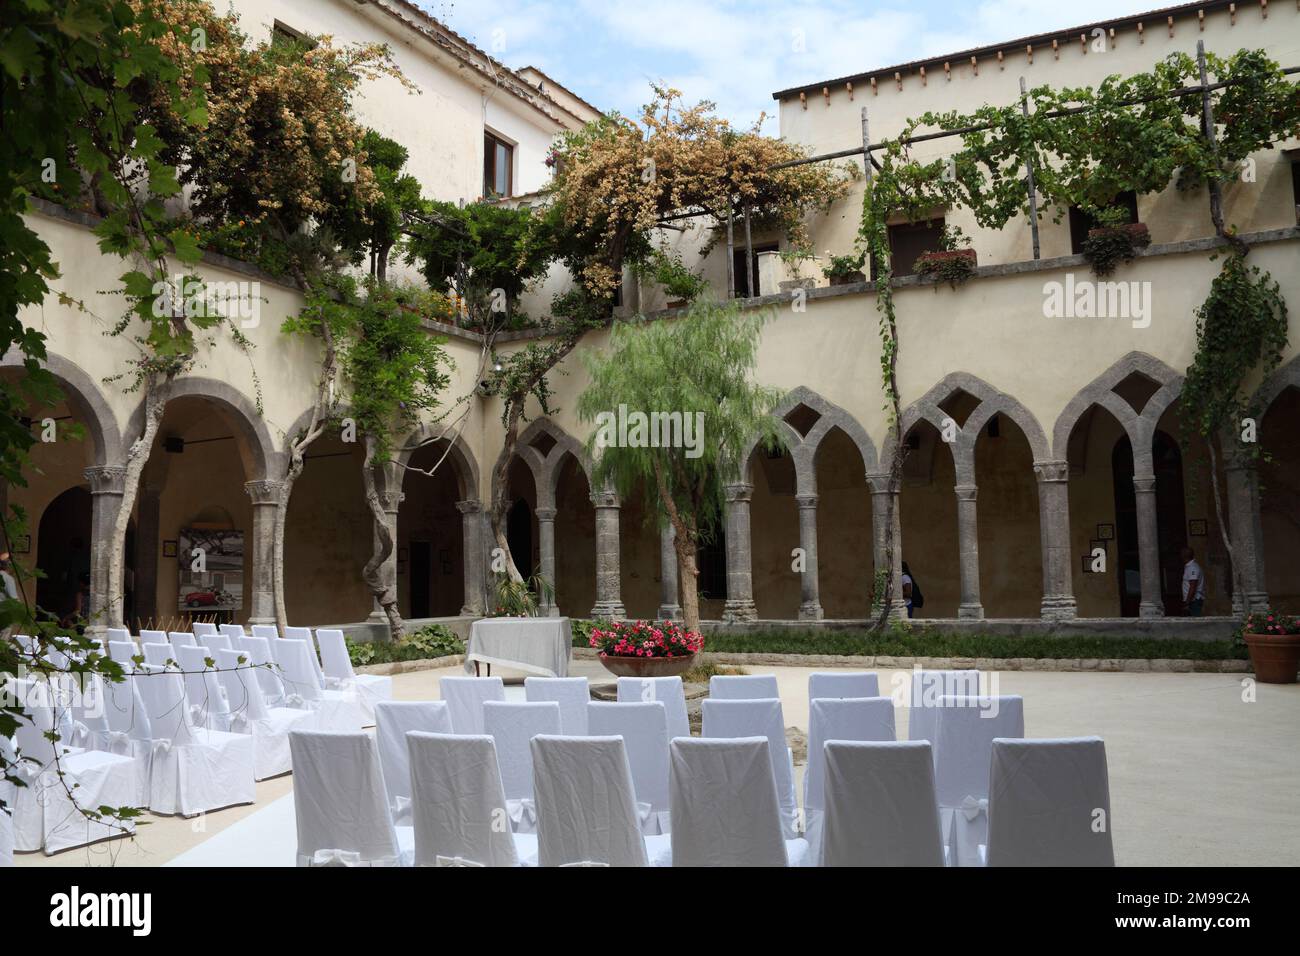 Wedding seating in the beautiful cloistered courtyard of the 14th century Chiostro di San Francesco, Sorrento, Campania, Italy Stock Photo